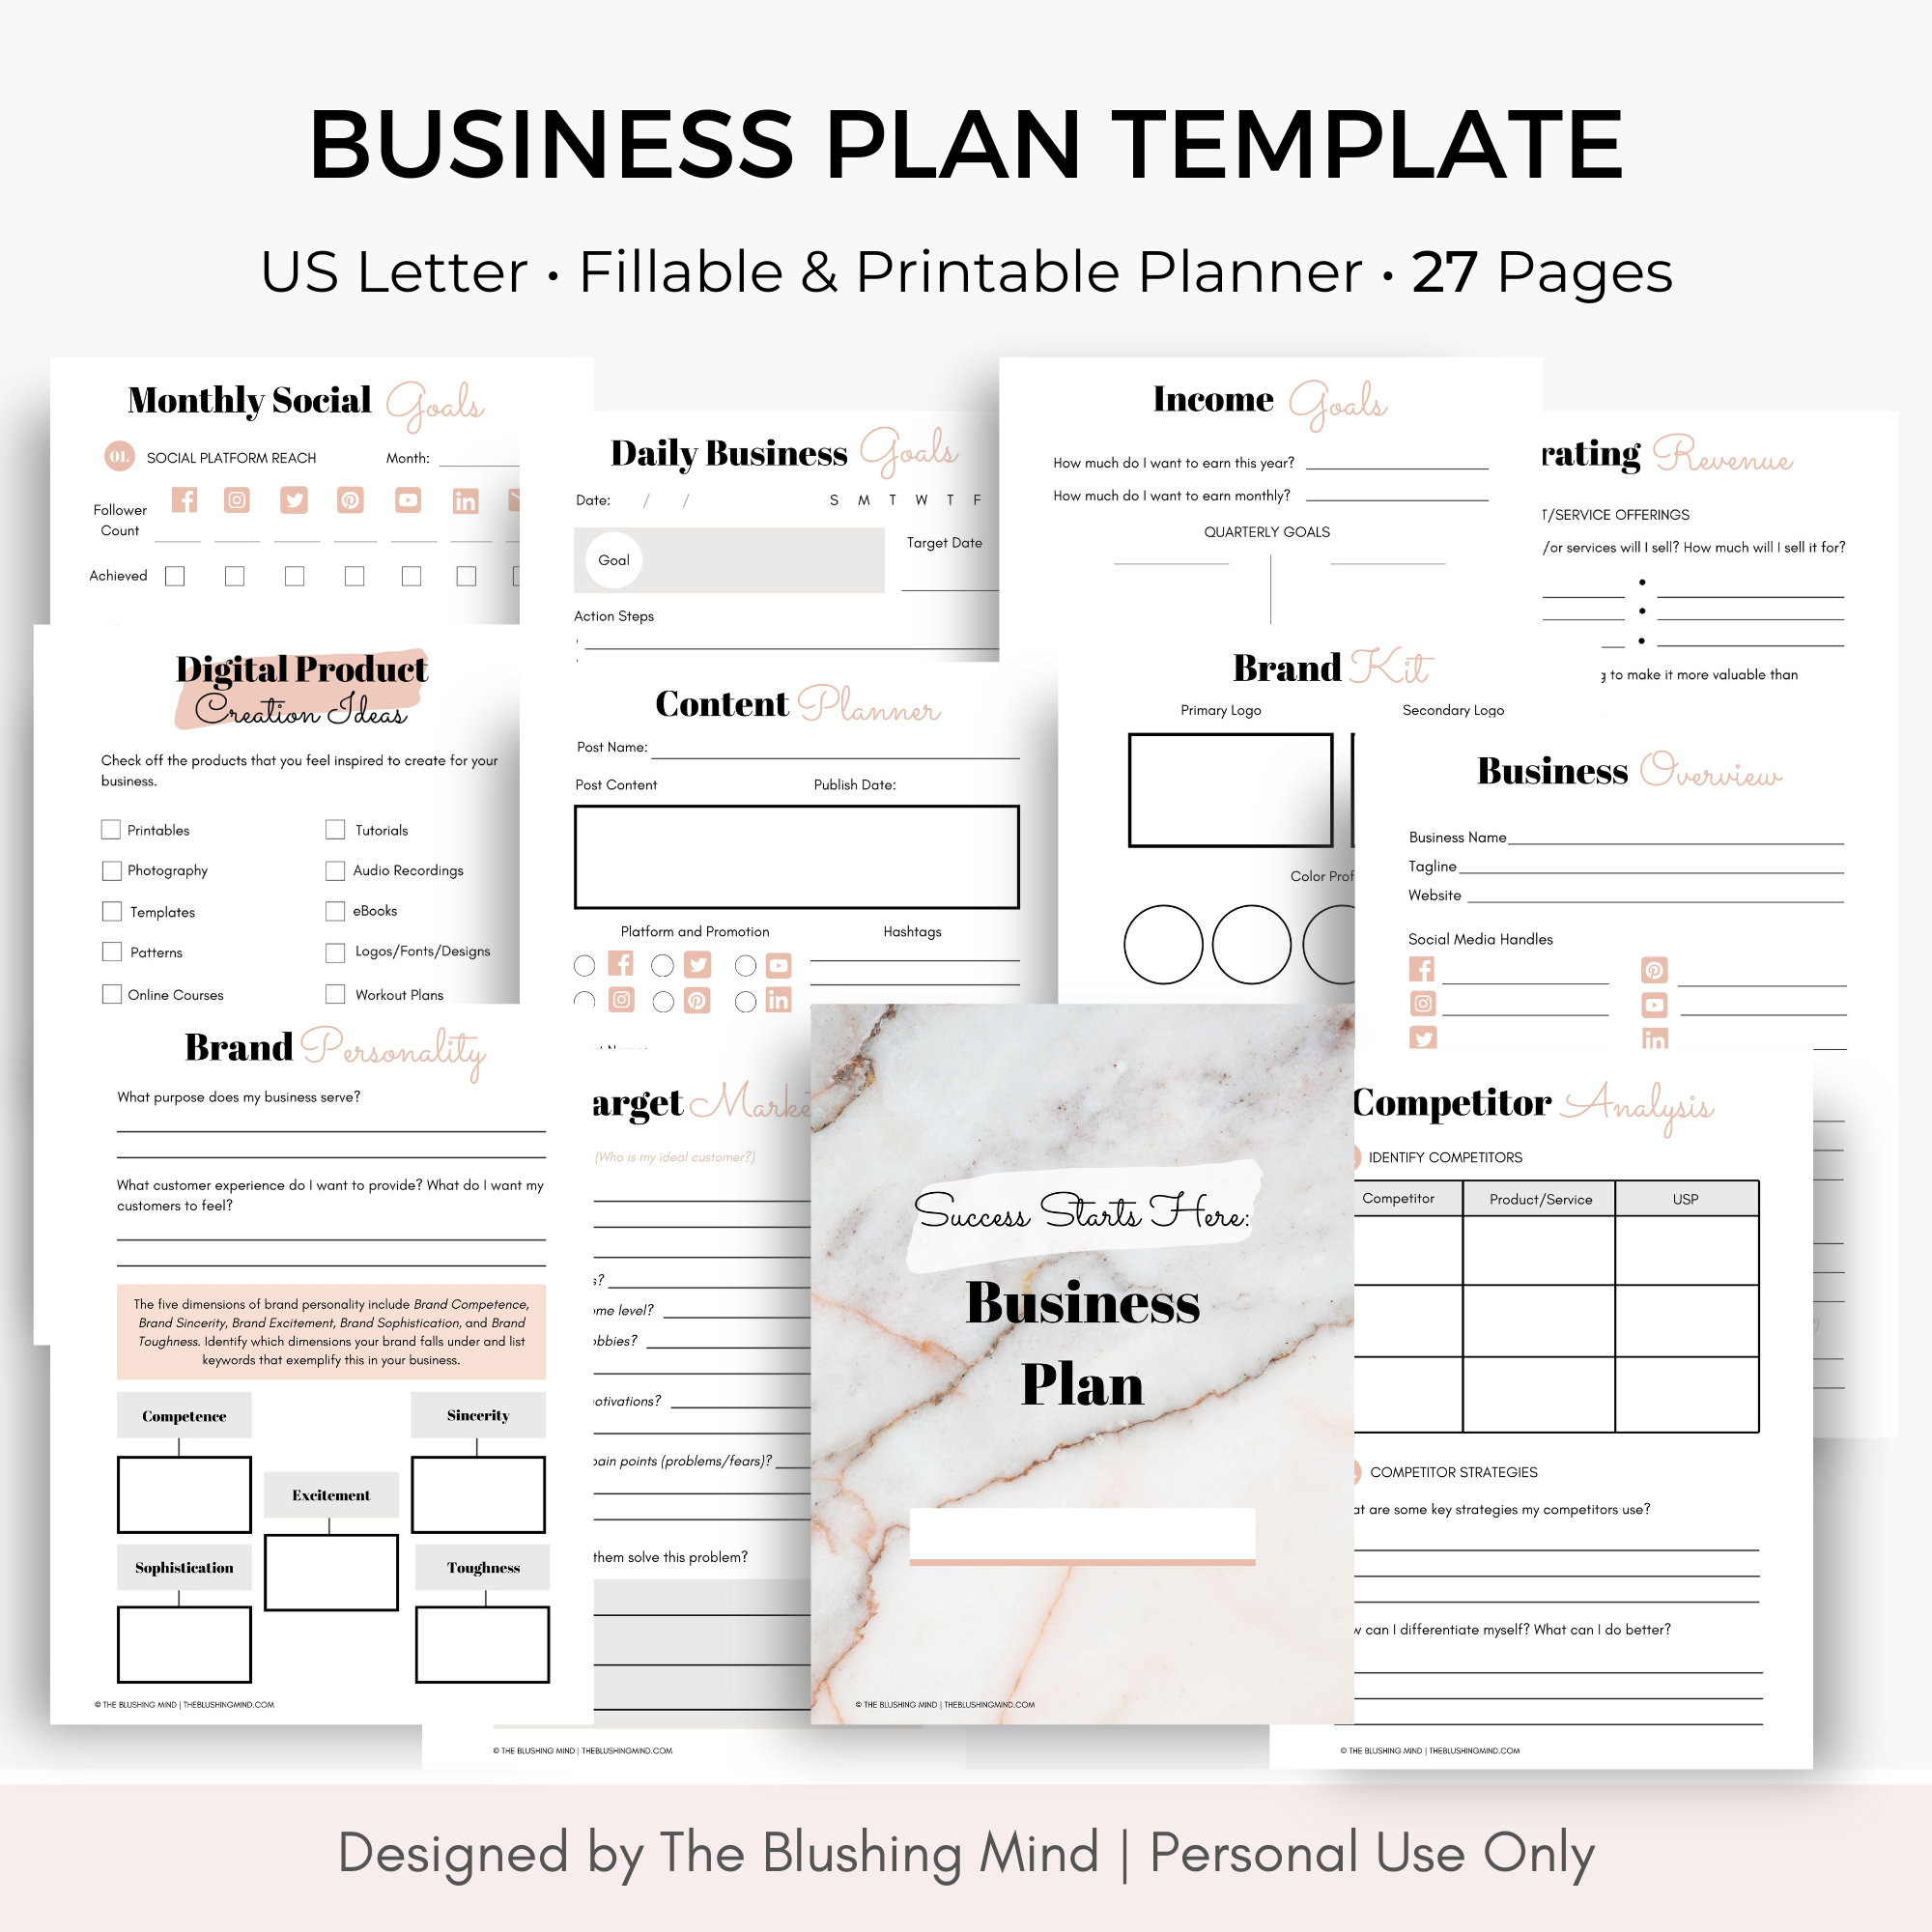 Business Plan Template: Business Planner, Small Business, Online Business,  Printable PDF, Fillable Planner, Fillable PDF 